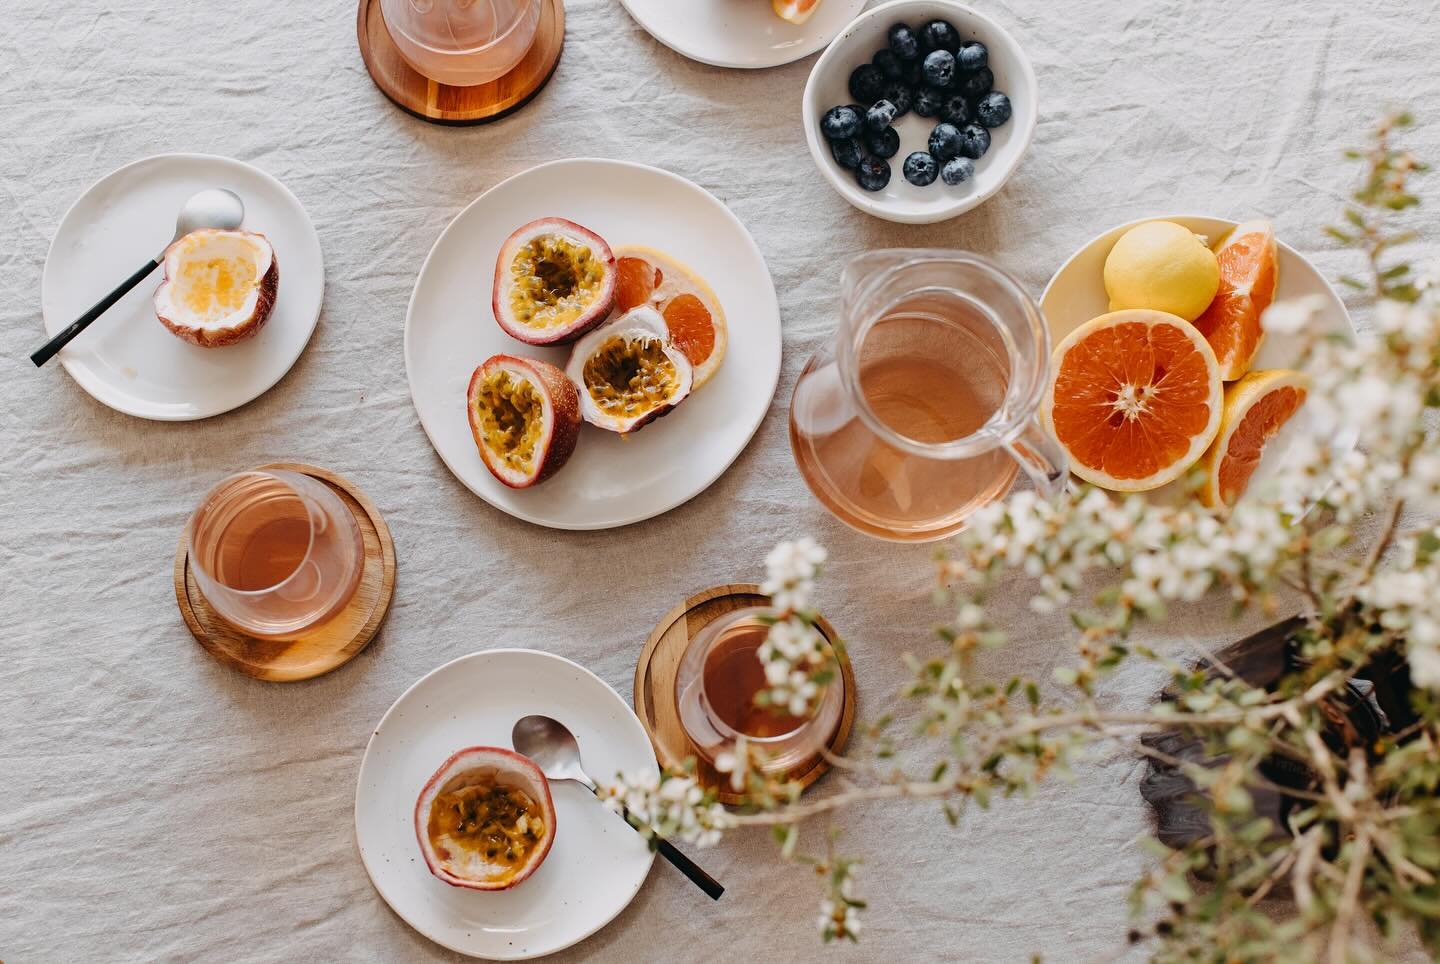 Tea time but make it summer. This is also so my vibe for pre-party drinks. Photographed for @roogenic ✨